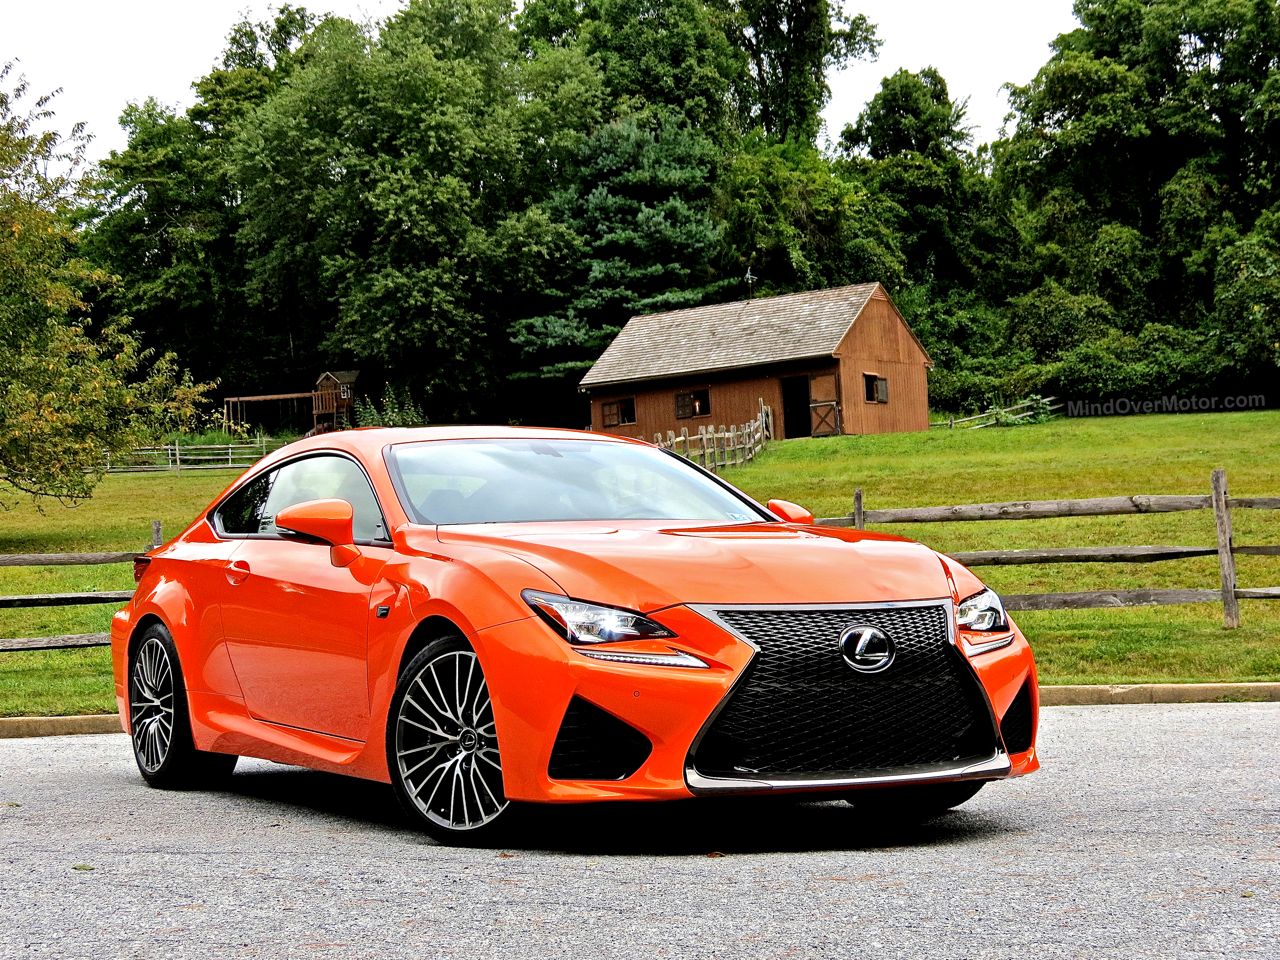 Lexus RC-F Review: The Best GT Car For The Money? | Mind Over Motor